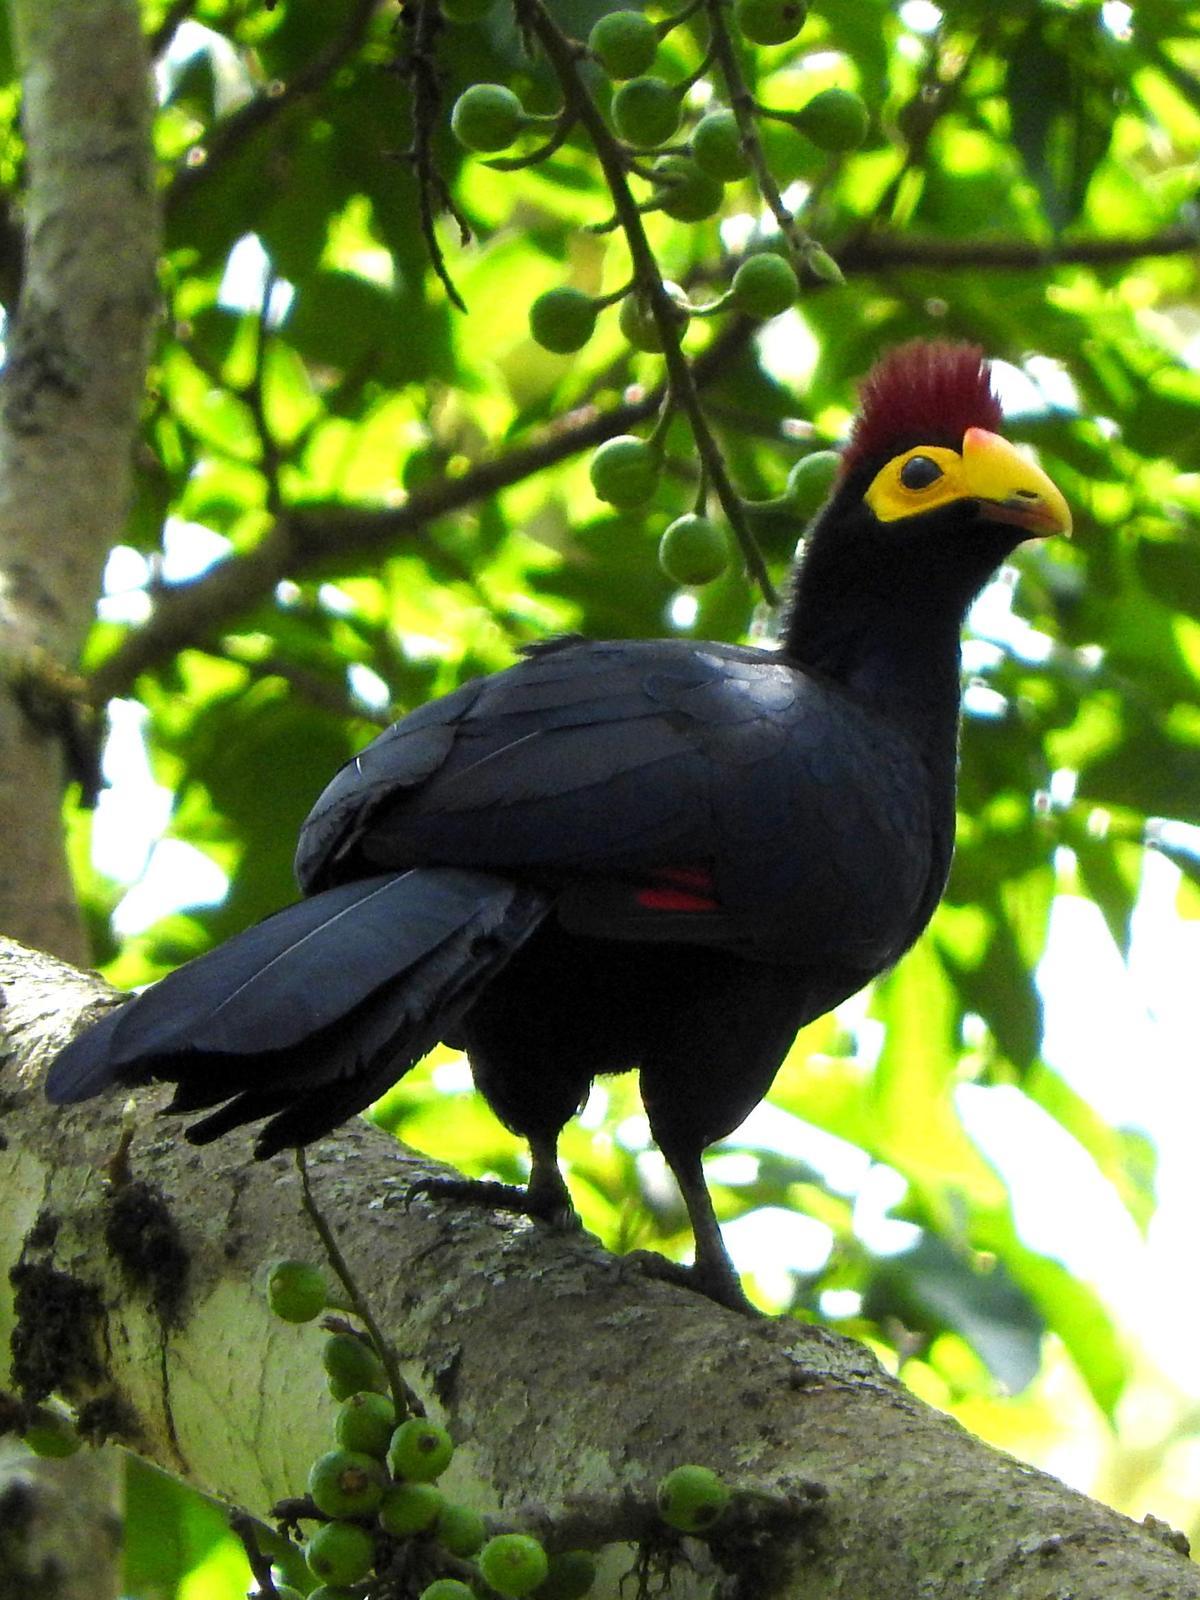 Ross's Turaco Photo by Todd A. Watkins